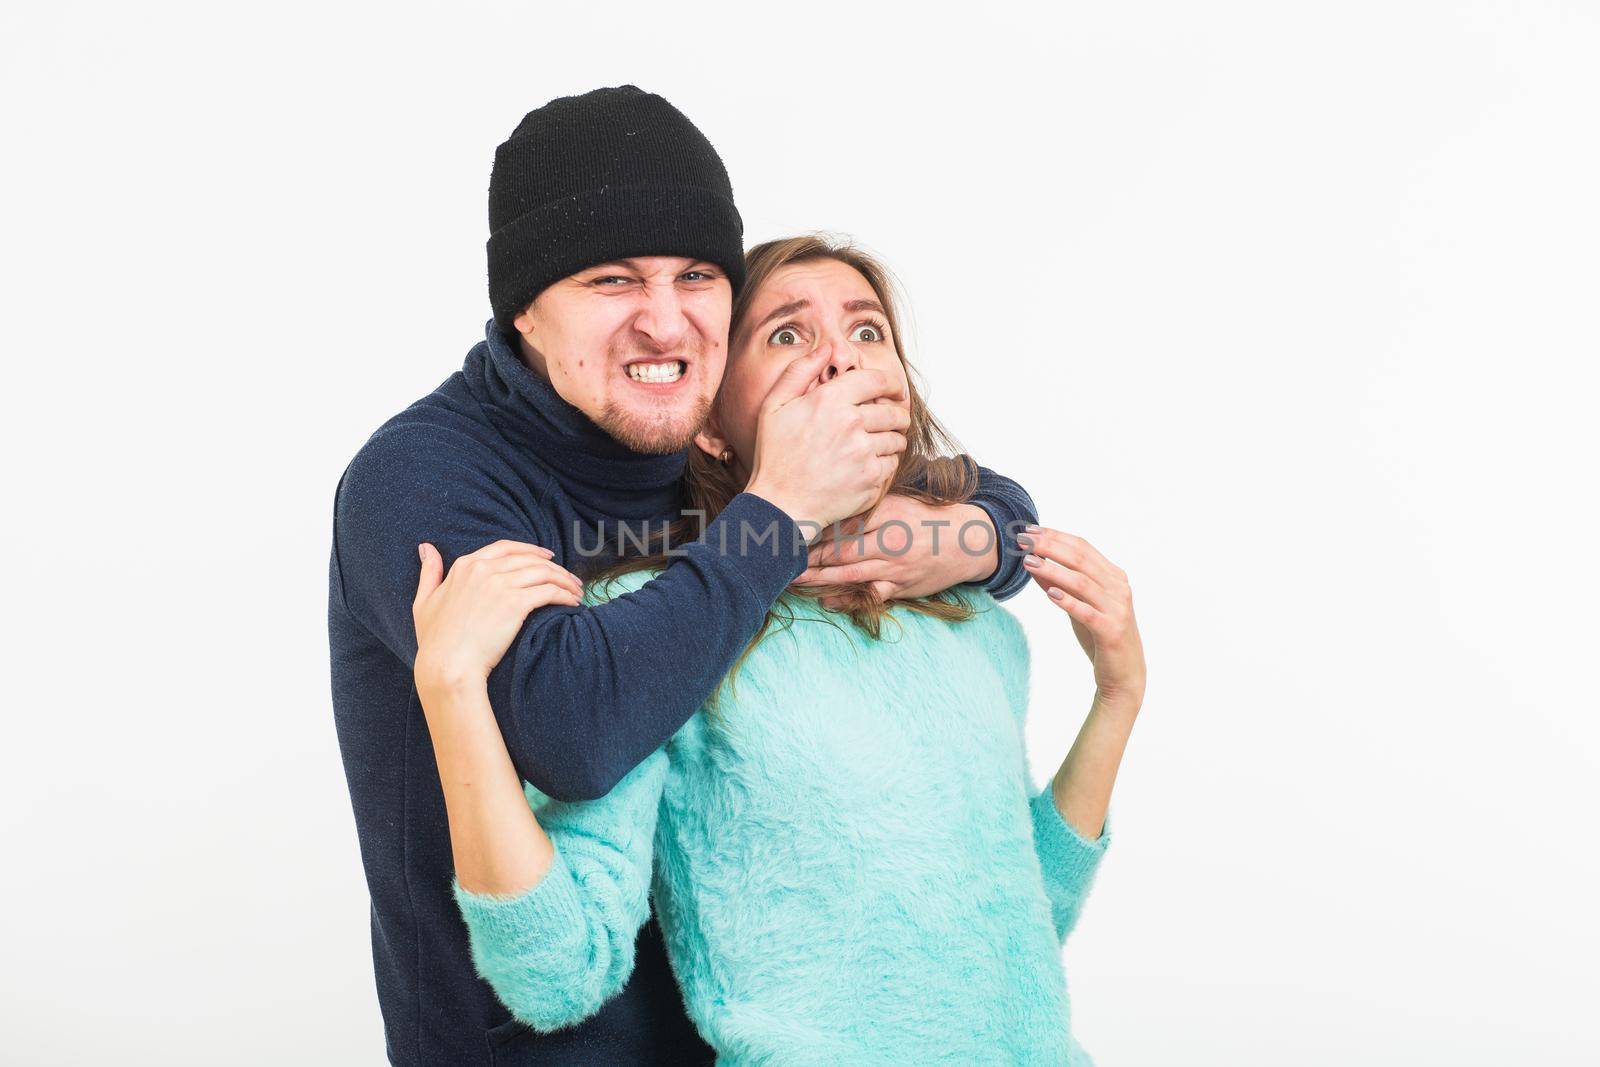 Woman victim of violence and abuse. Criminal man beats a woman on white background by Satura86